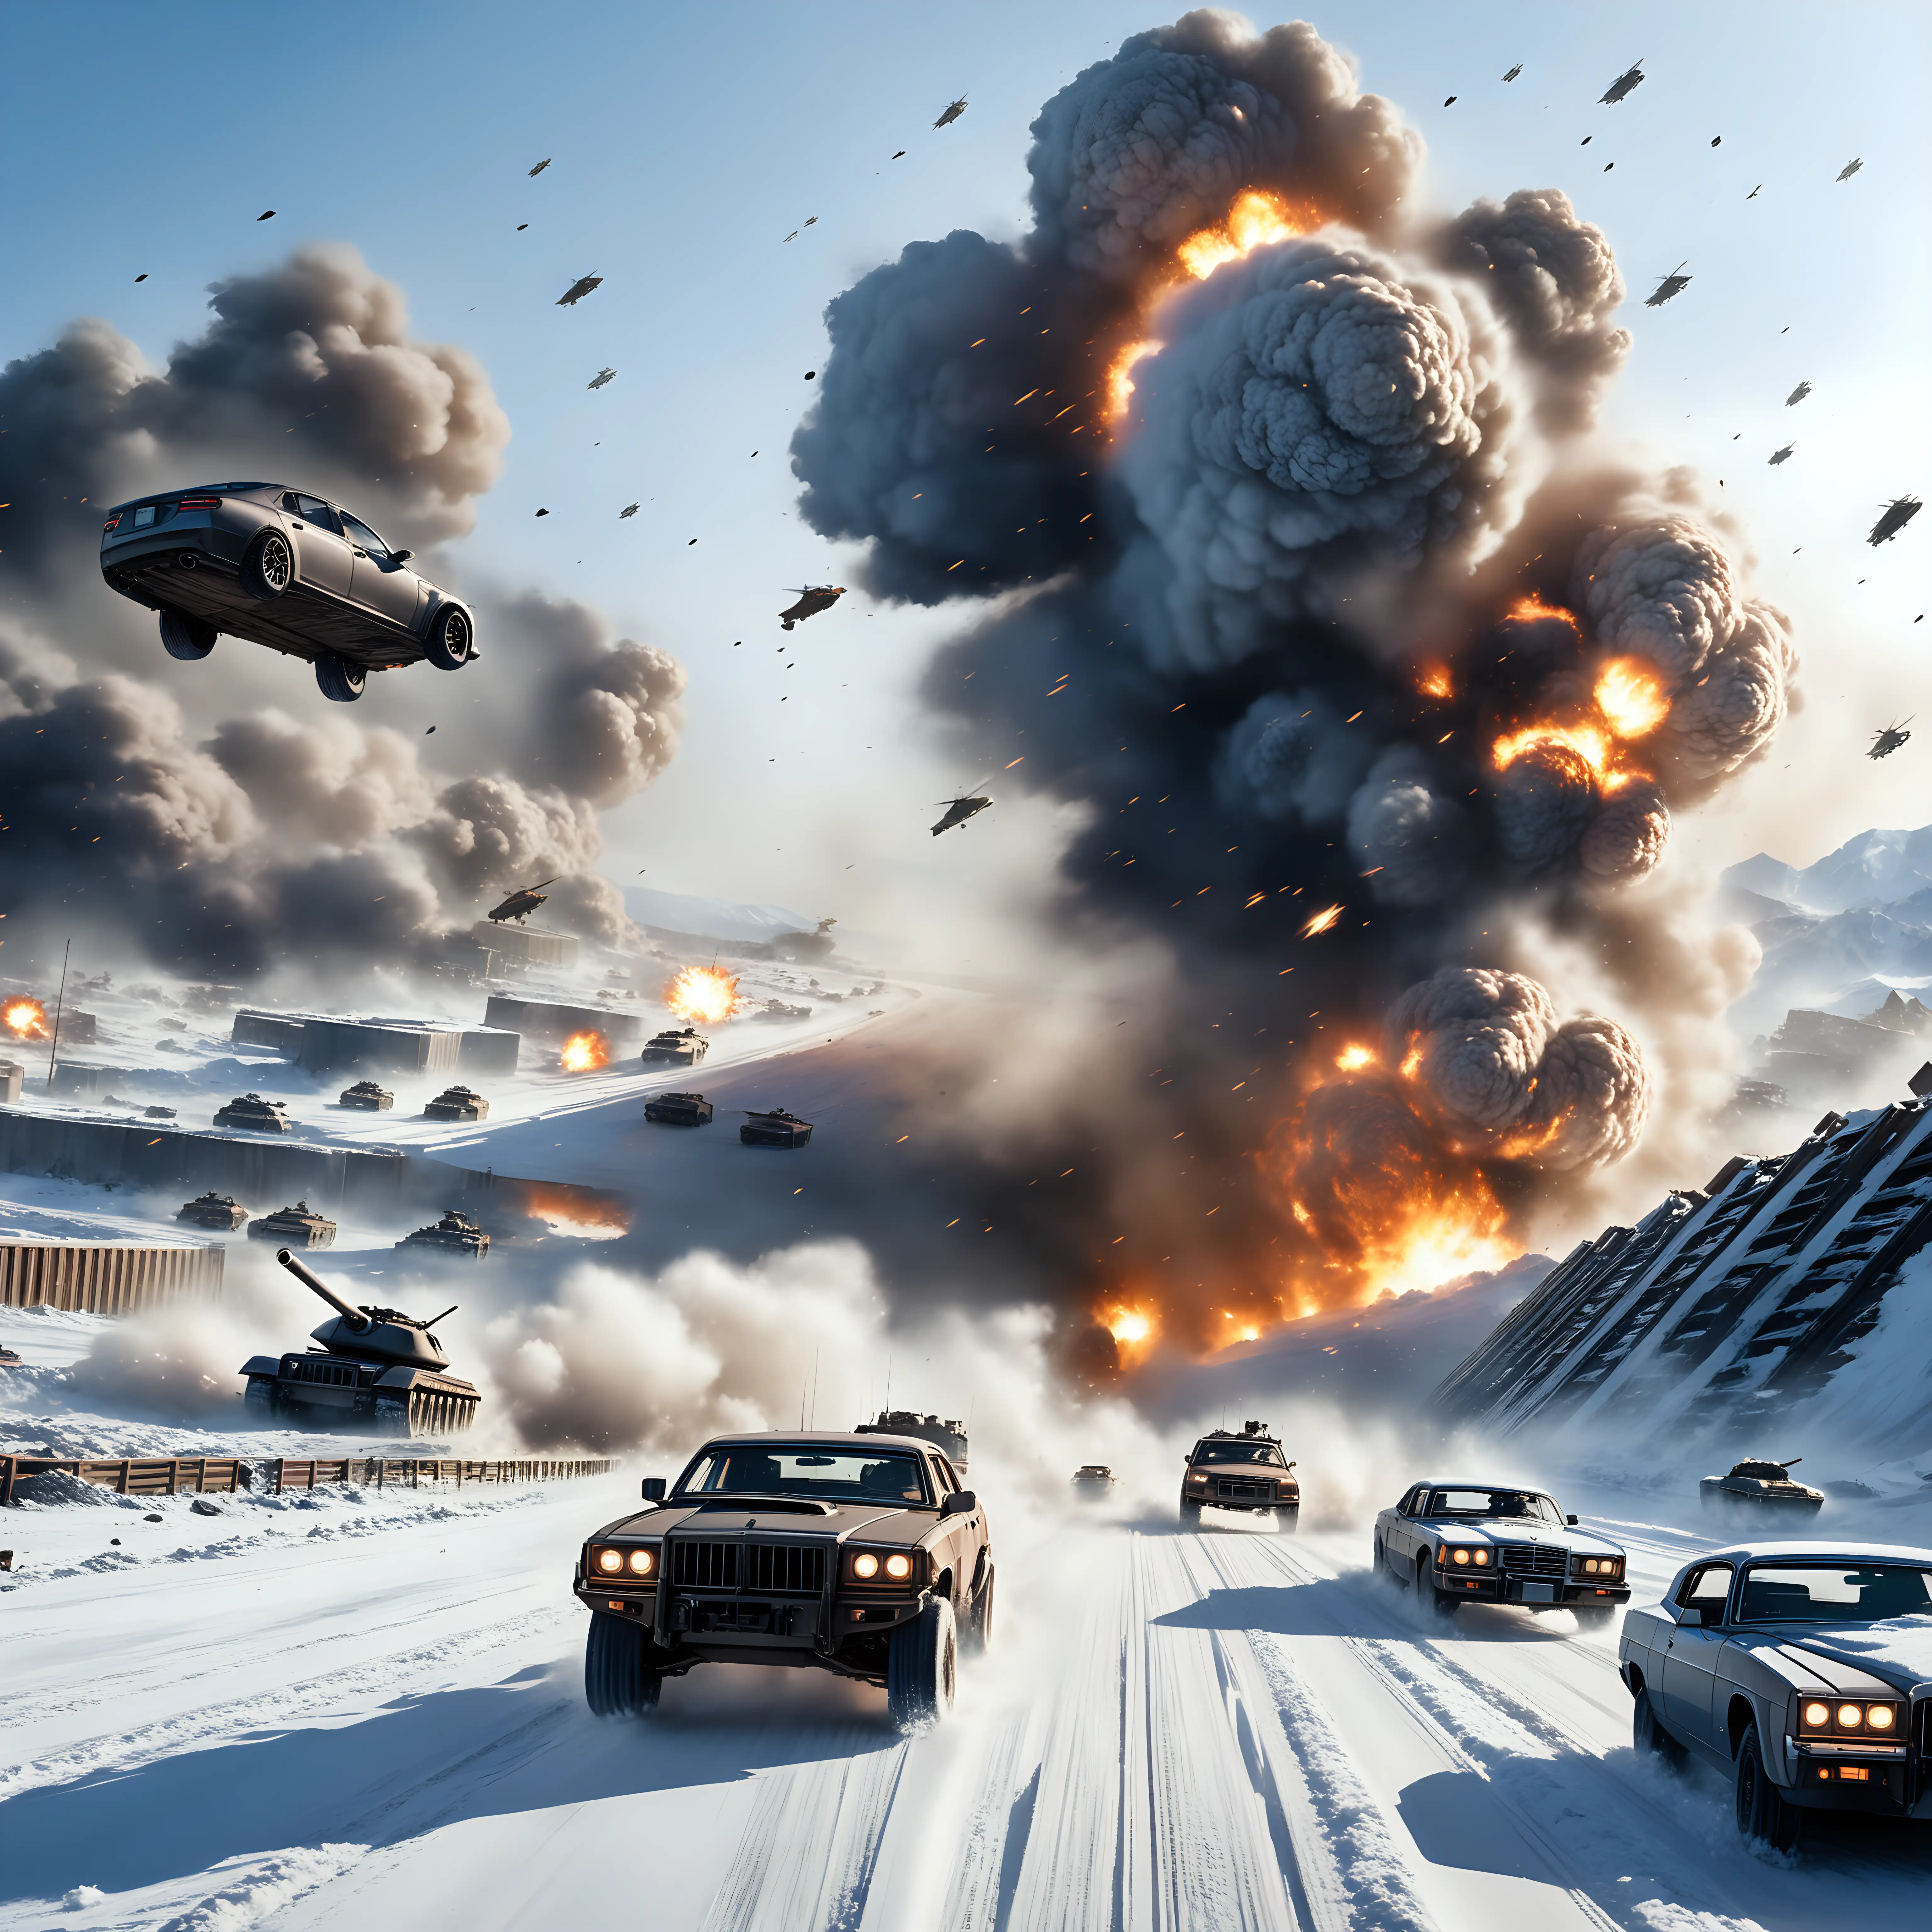 HighStakes-Snowy-Car-Chase-Scene-with-Explosions-and-Dramatic-Escape